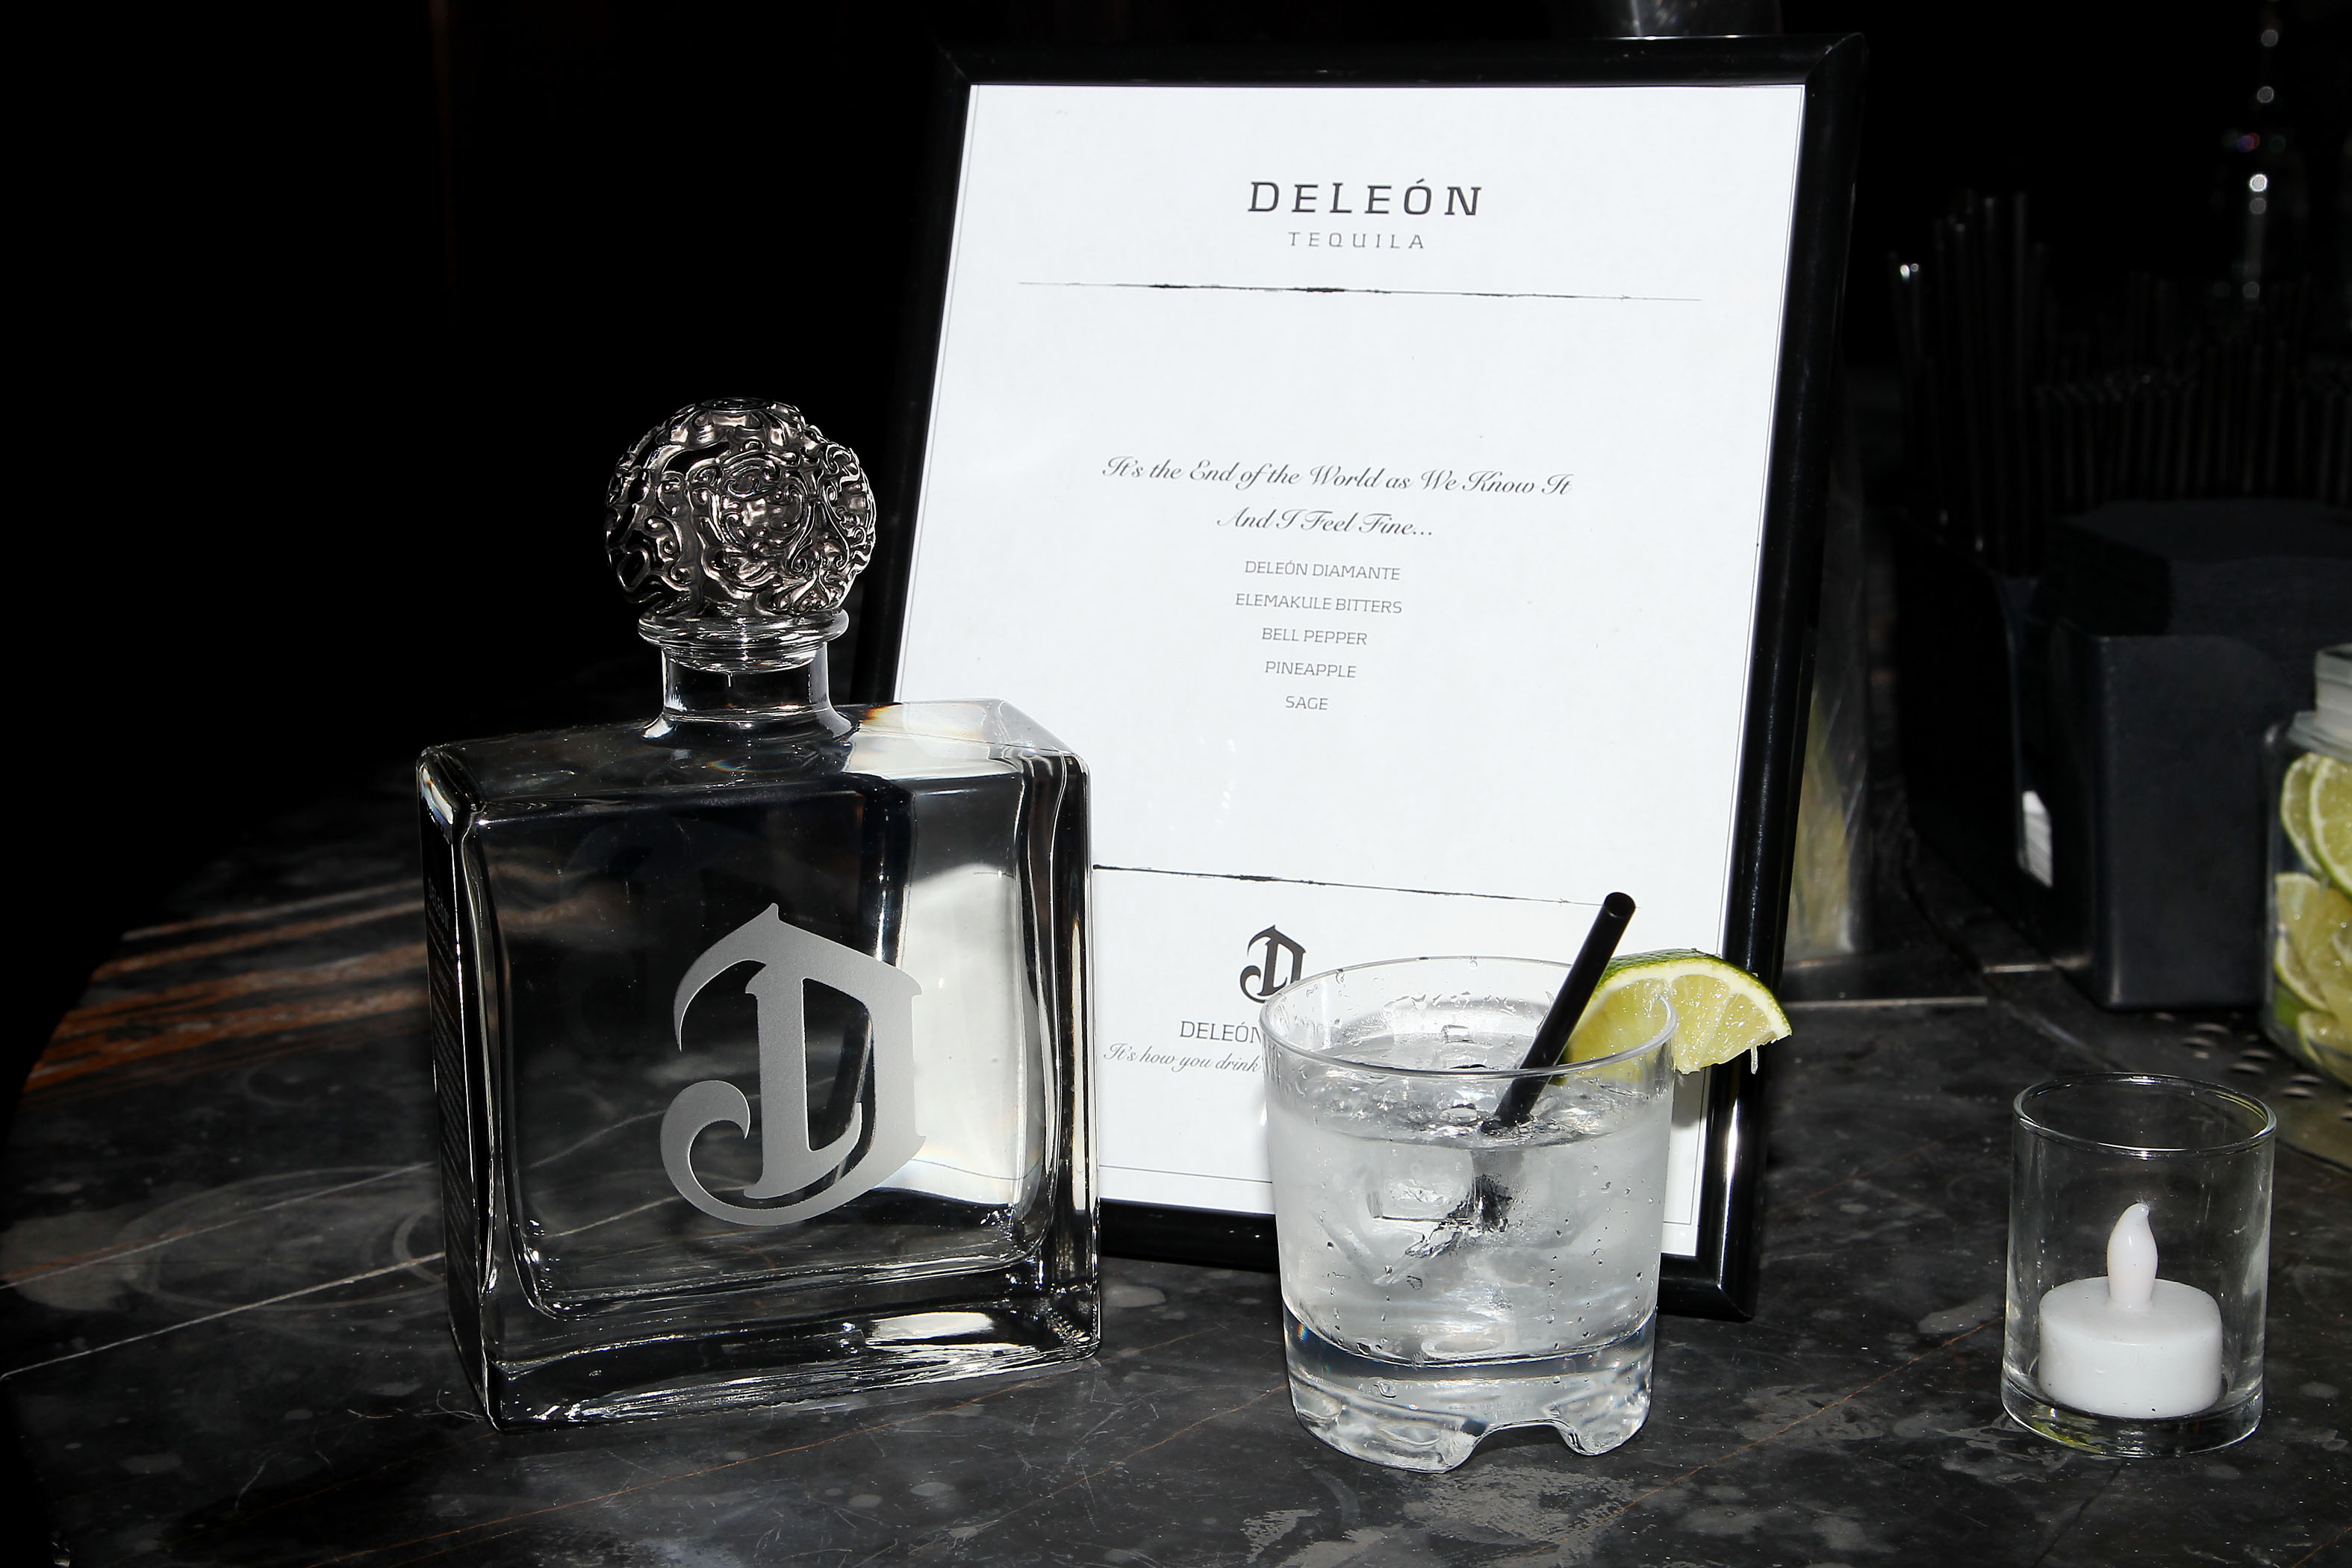 DeLeon Tequila - The After Party for World War Z at CATCH Roof